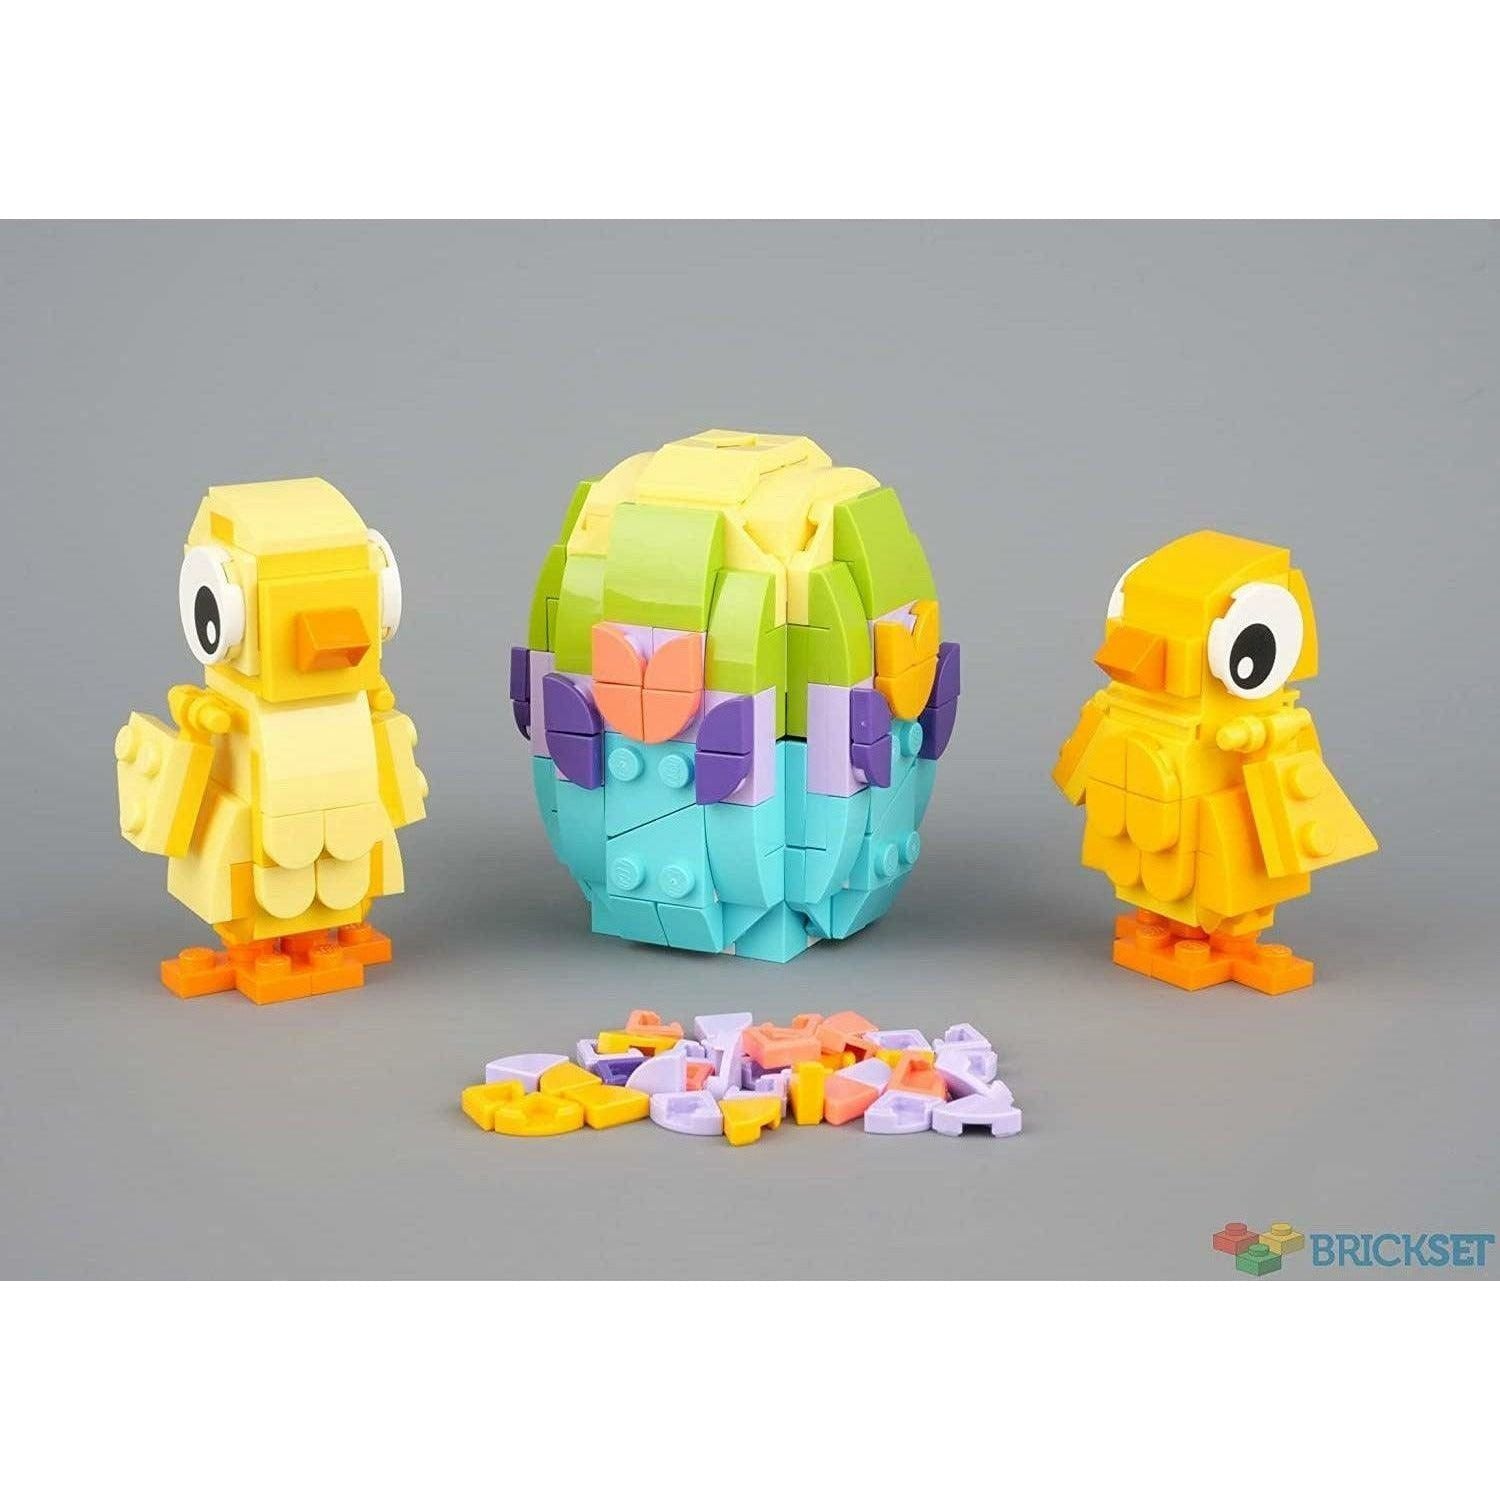 Lego 40527 Easter Chicks 318 Pieces - BumbleToys - 8+ Years, 8-13 Years, Boys, LEGO, OXE, Pre-Order